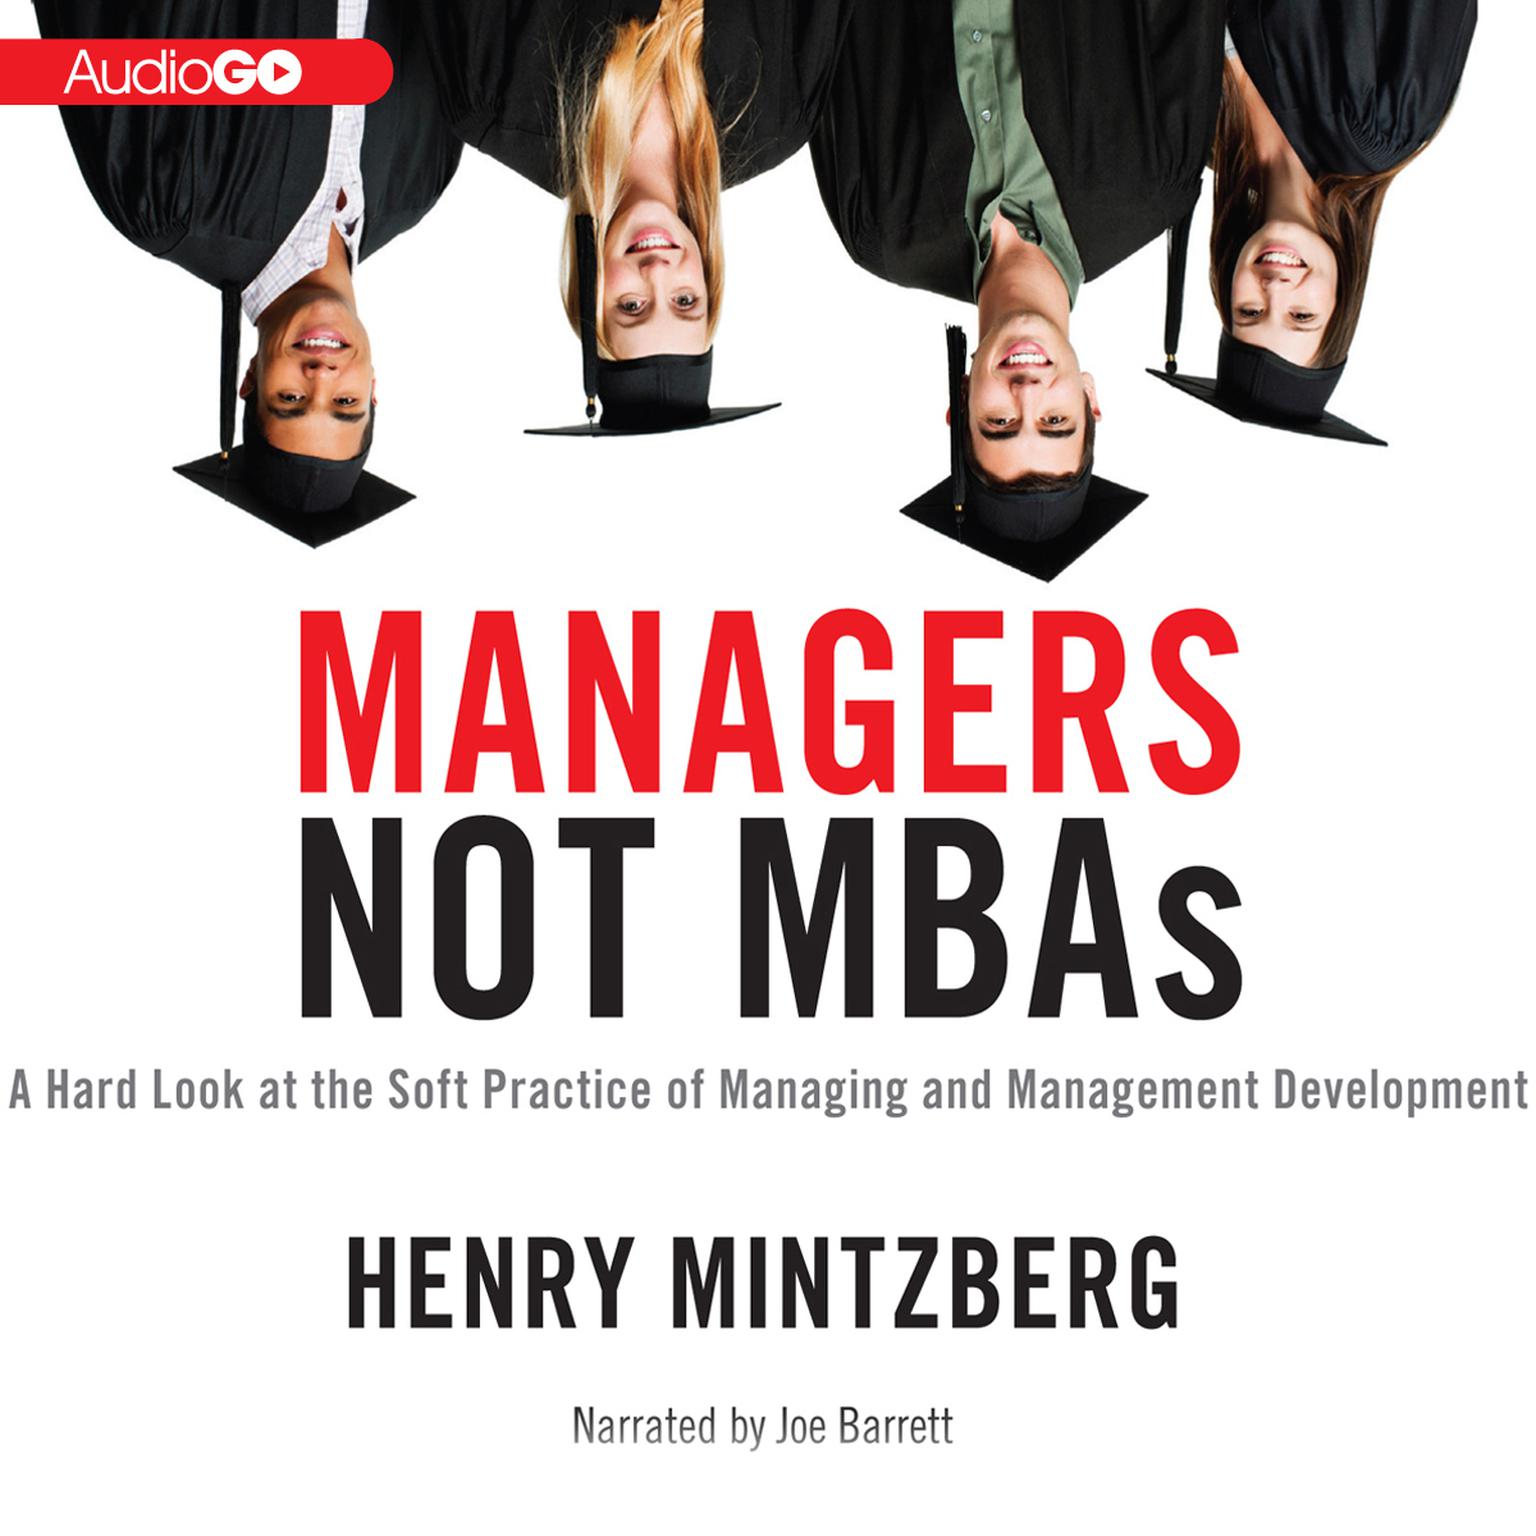 Managers Not MBAs: A Hard Look at the Soft Practice of Managing and Management Development Audiobook, by Henry Mintzberg